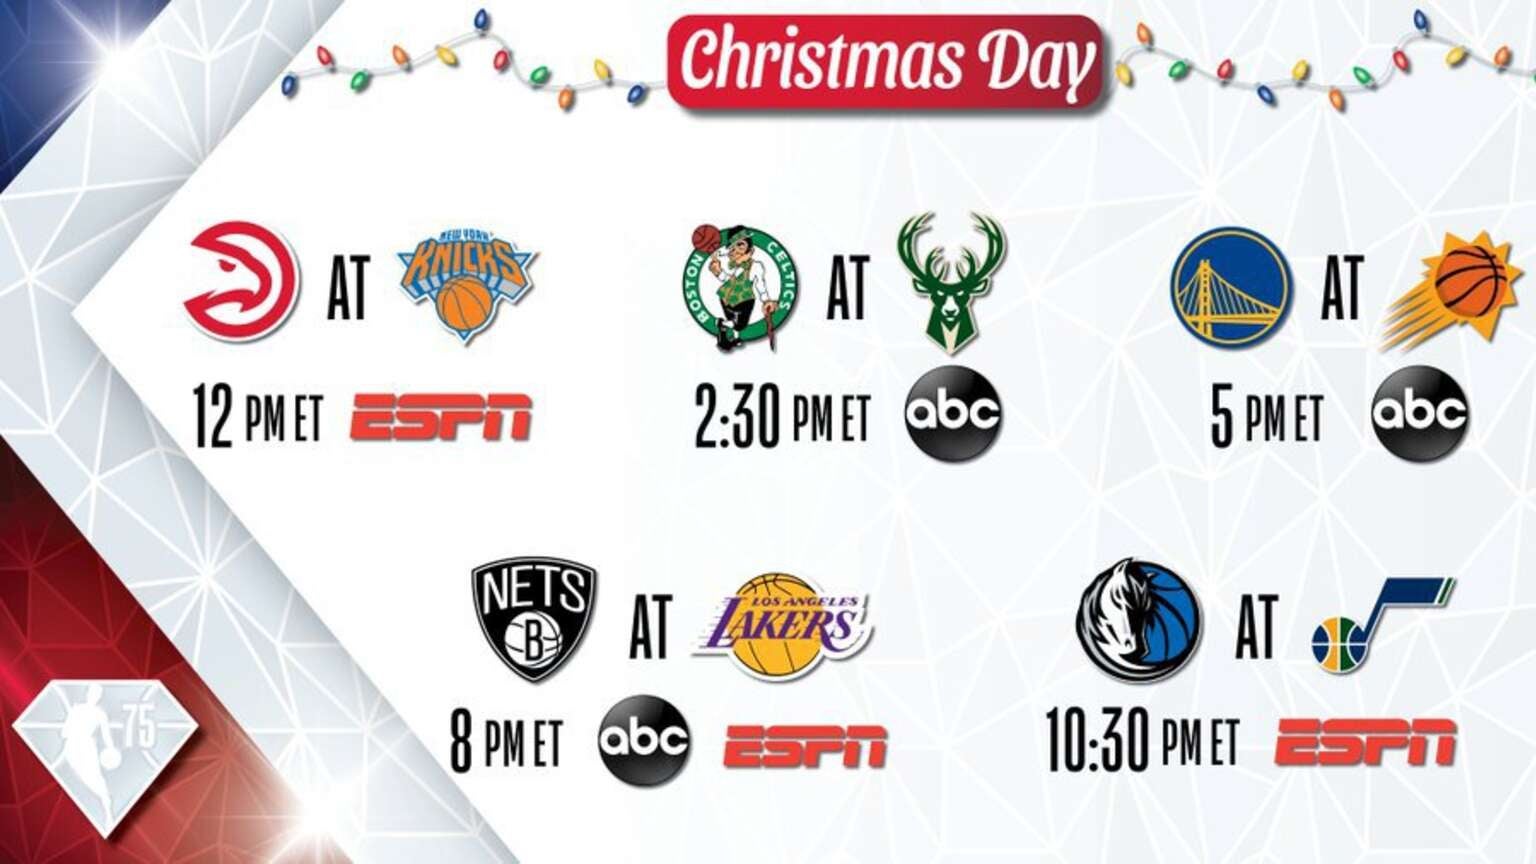 How to Watch the 2021 NBA Christmas Day Games Live Online Without Cable – The Streamable